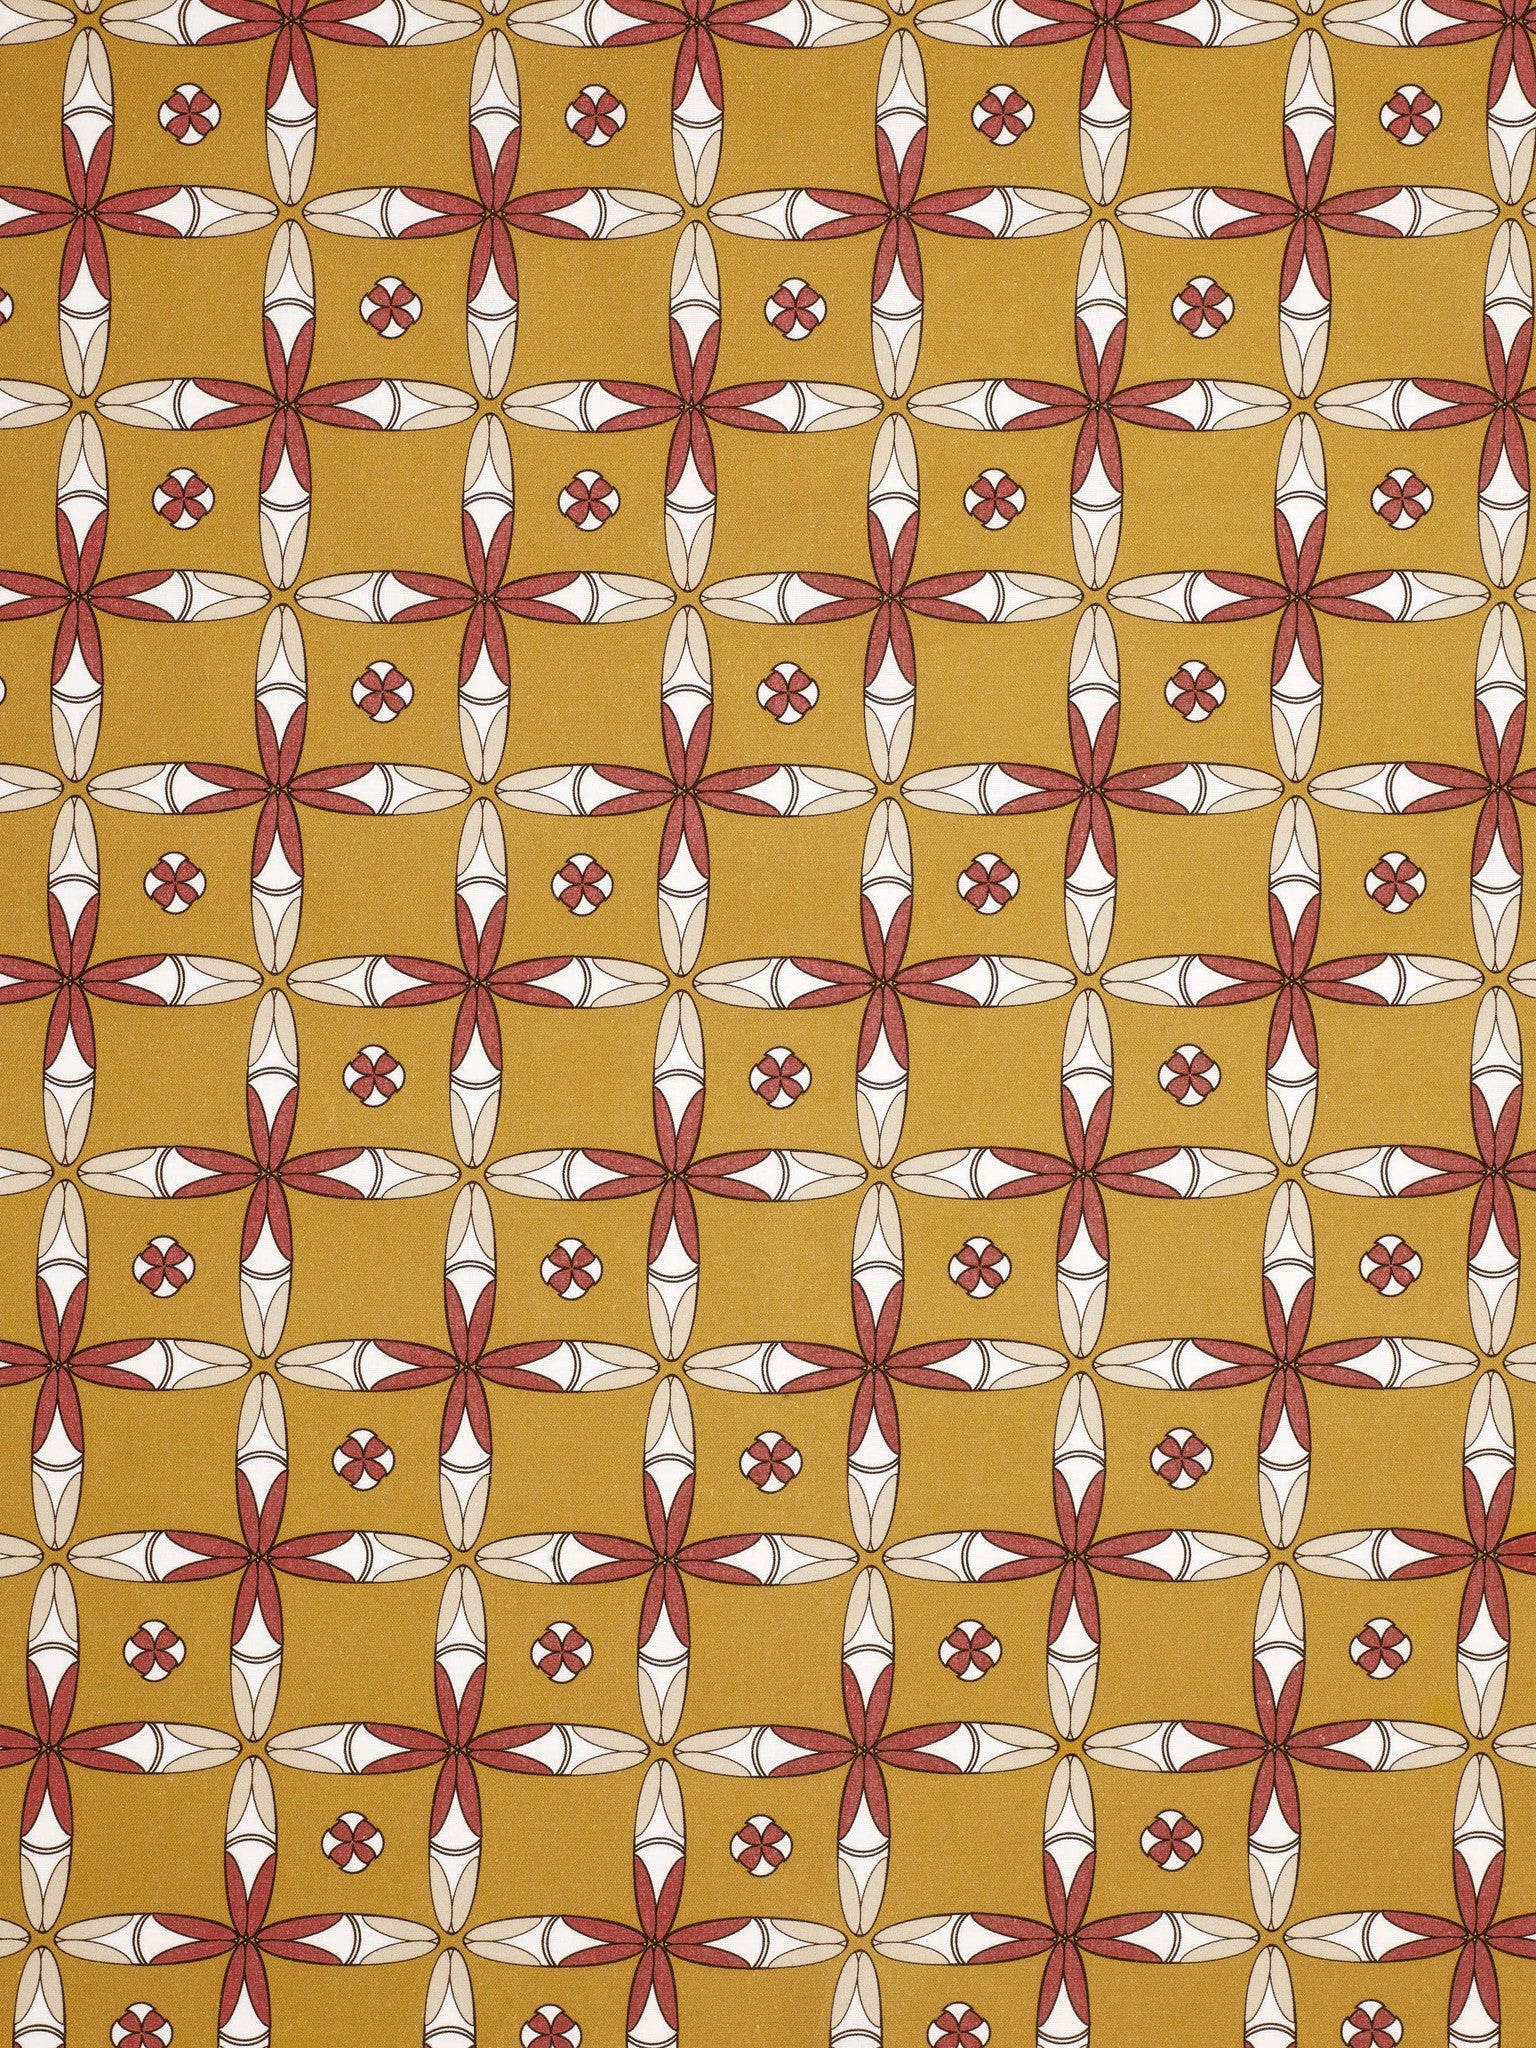 Navajo Ethnic Geometric Pattern Cotton Linen Home Decor Fabric by the meter or by the yard for curtains, blinds, upholstery - Gold - Canada (USA)